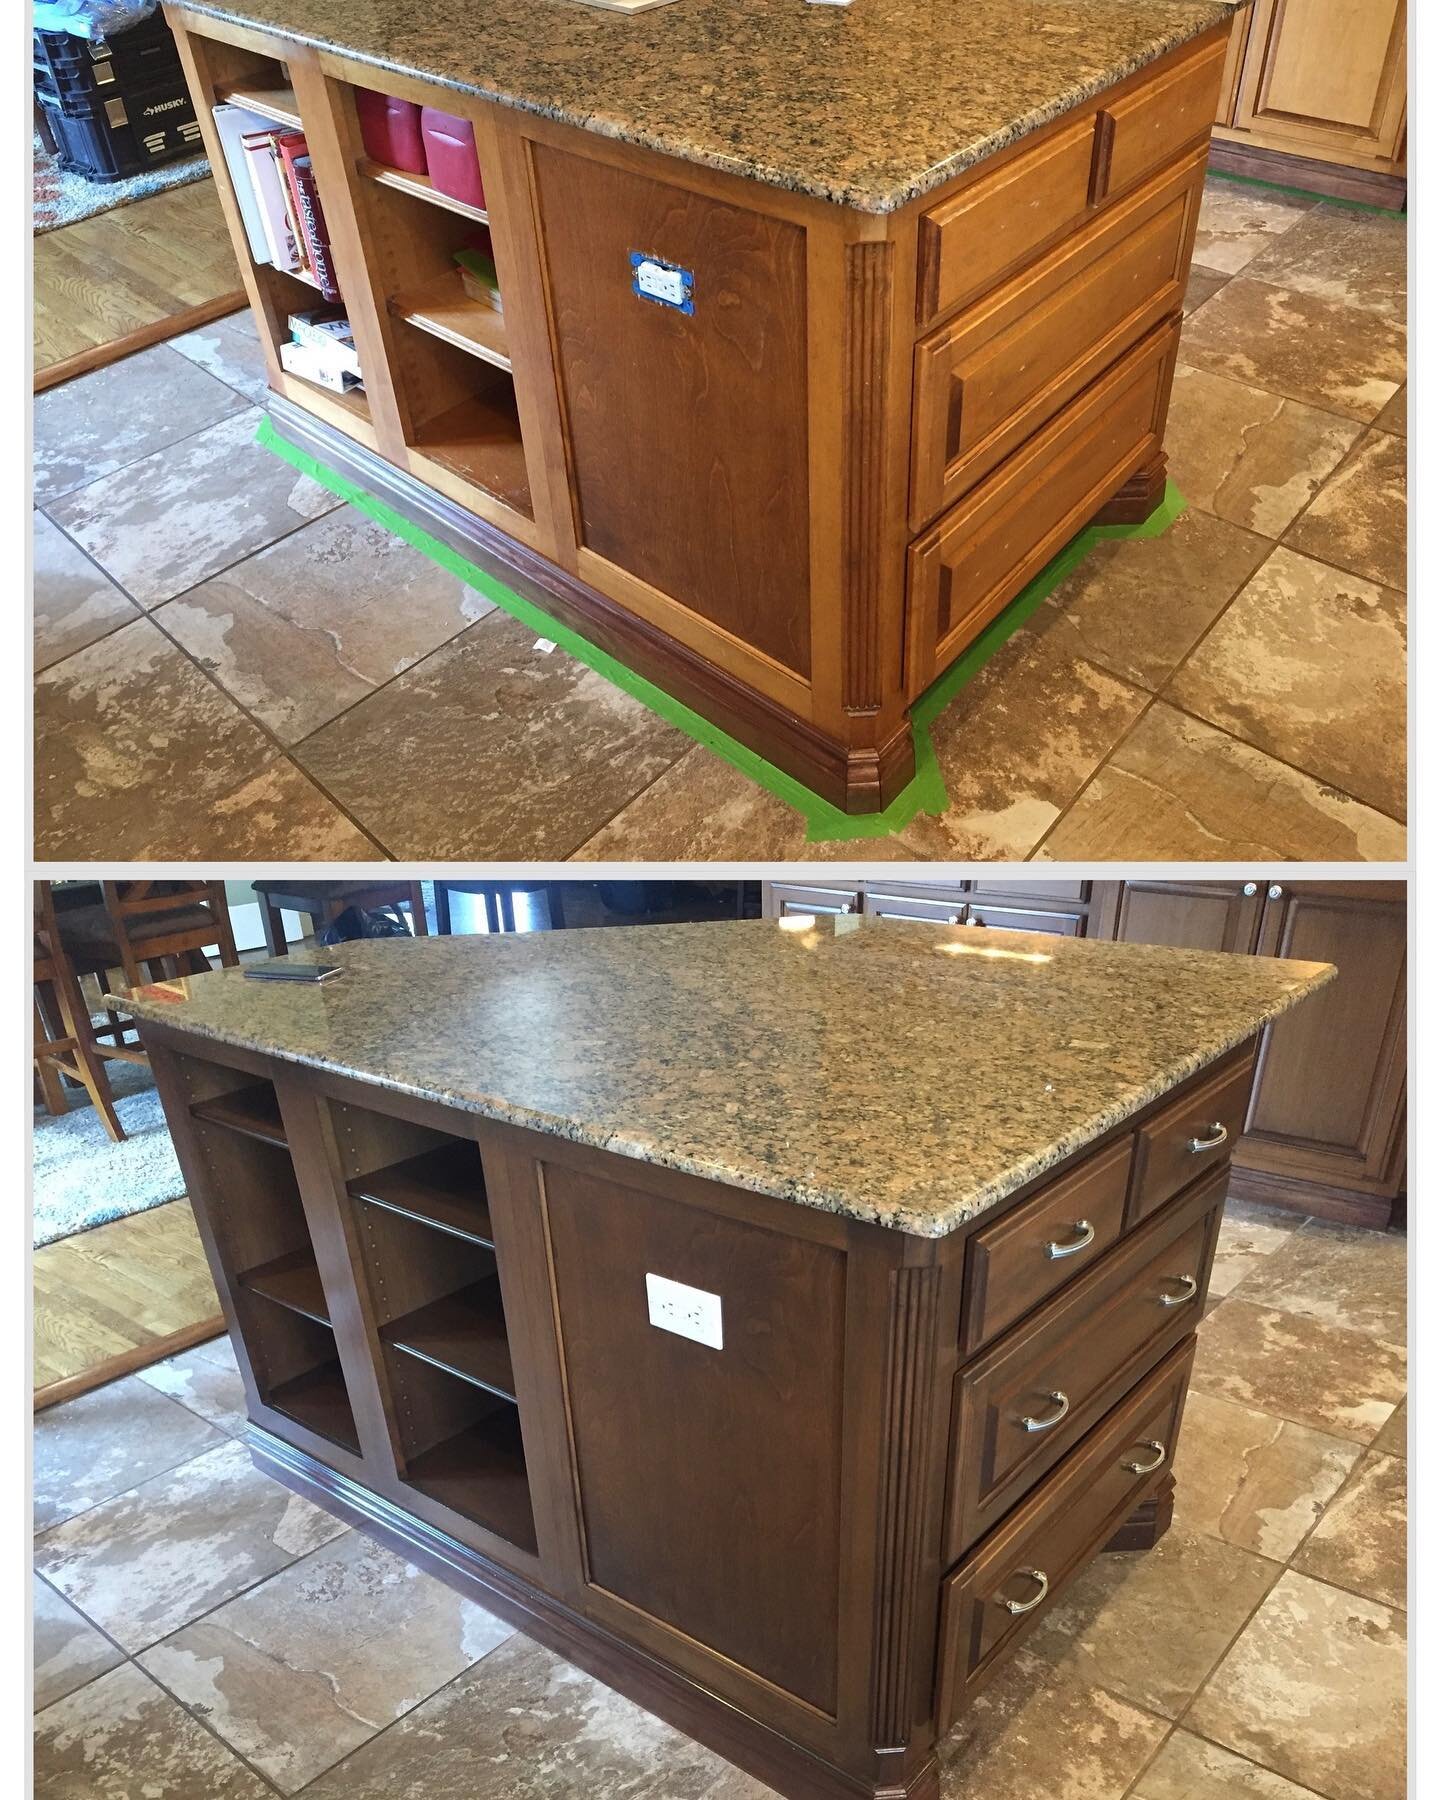 Your dream cabinets are closer than you think! Check out the difference Fresh Start can make in your kitchen!

#refinishing #springcleaning #cabinetideas